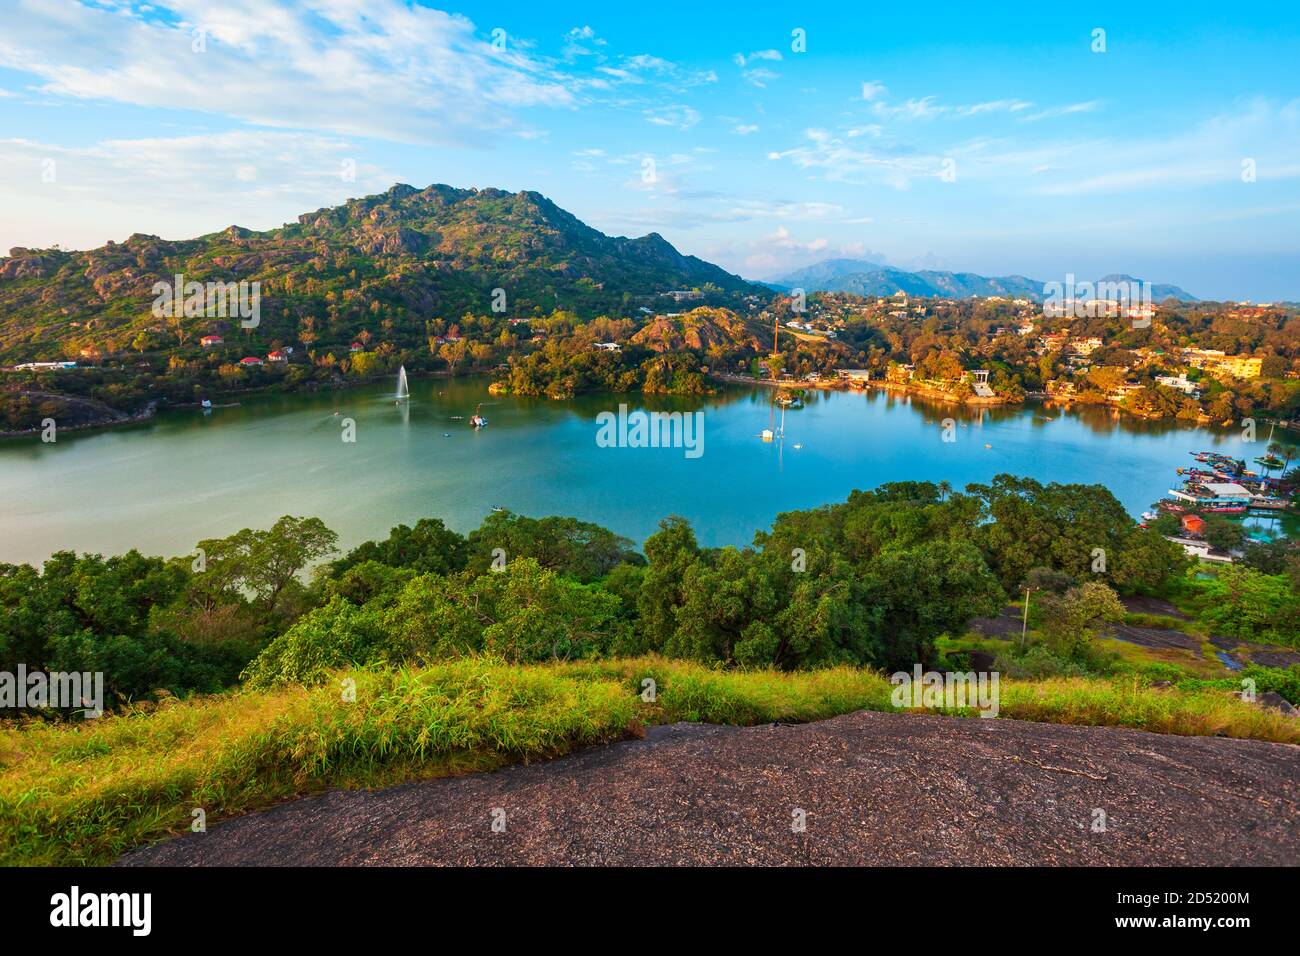 Mount Abu and Nakki lake aerial panoramic view. Mount Abu is a hill station in Rajasthan state, India. Stock Photo